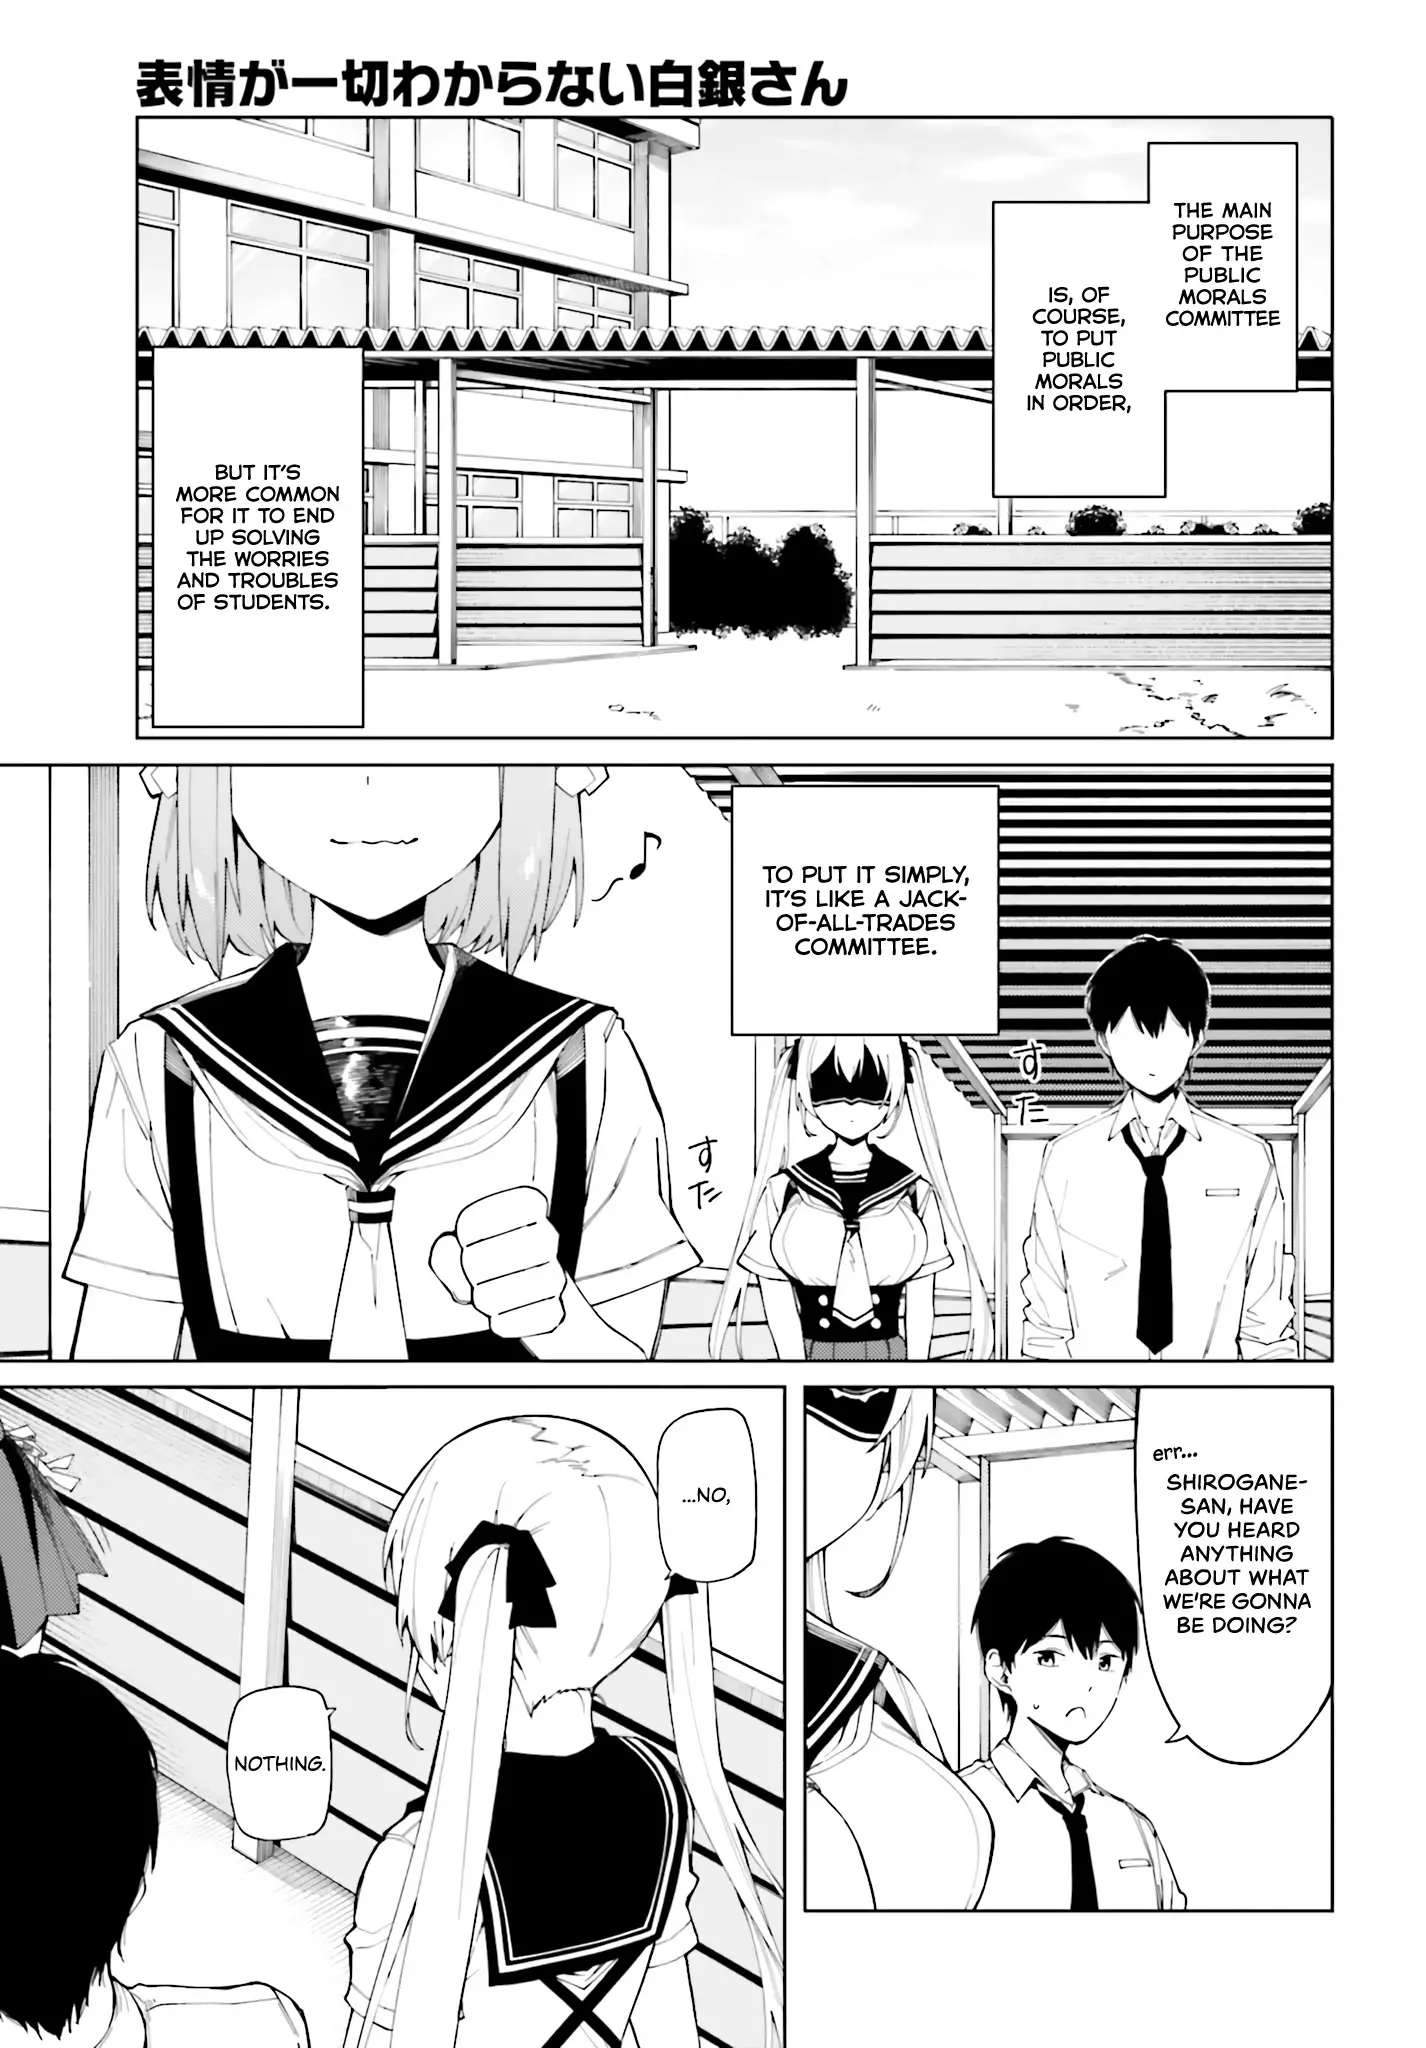 I Don't Understand Shirogane-San's Facial Expression At All - 1 page 10